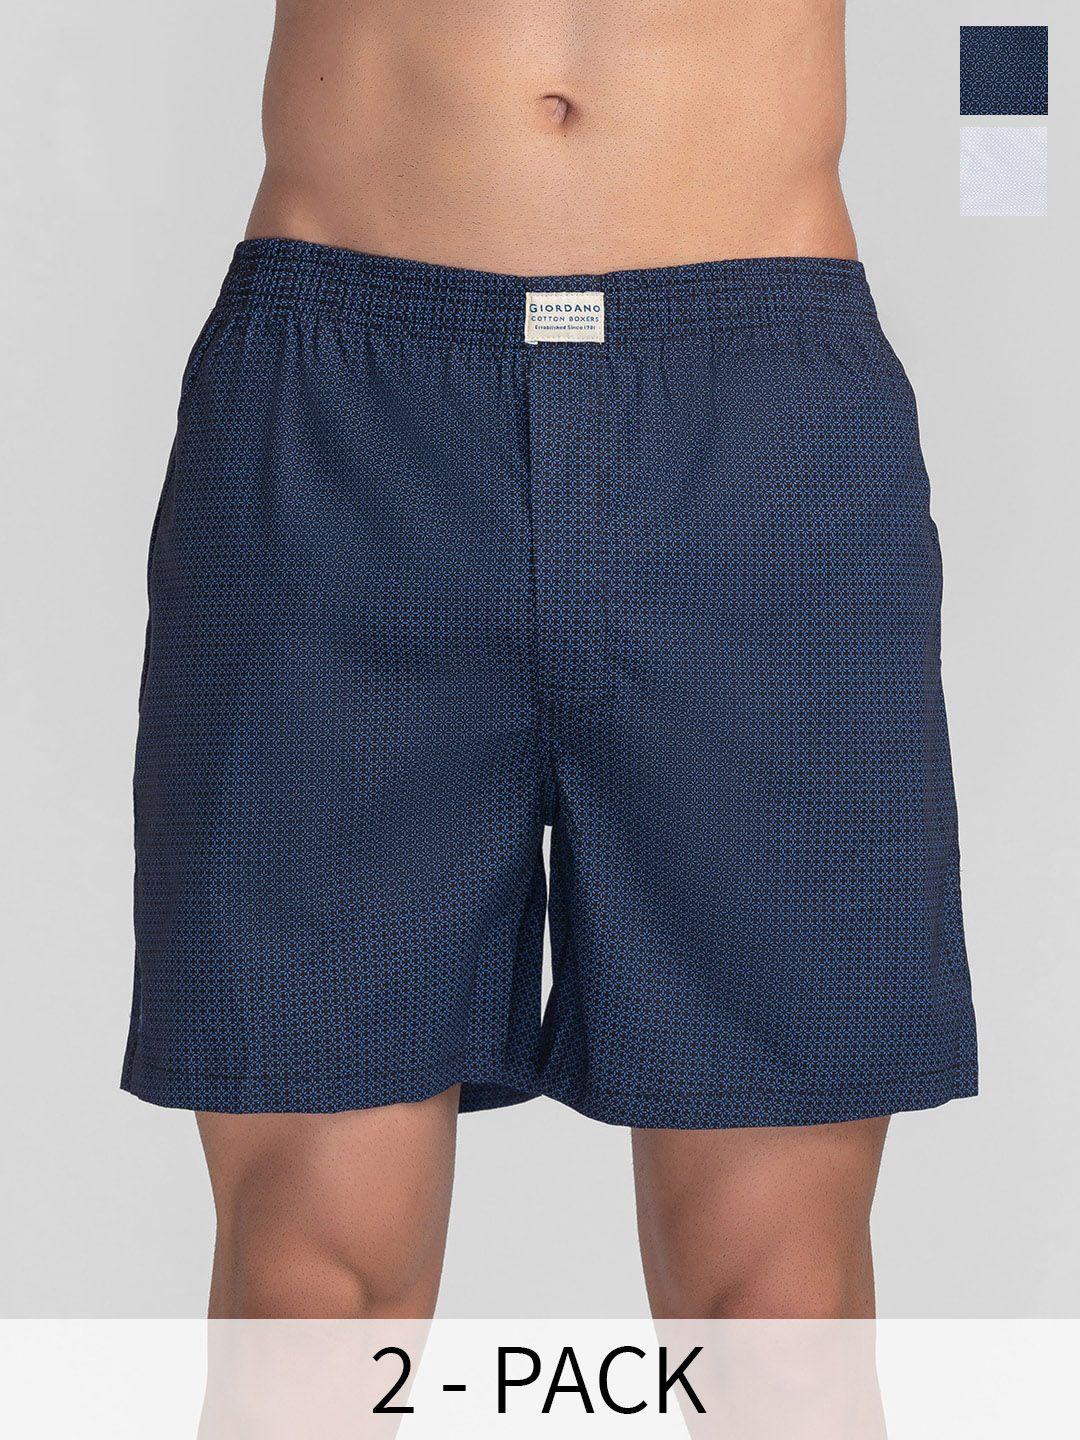 giordano pack of 2 printed pure cotton boxers gmbox345679